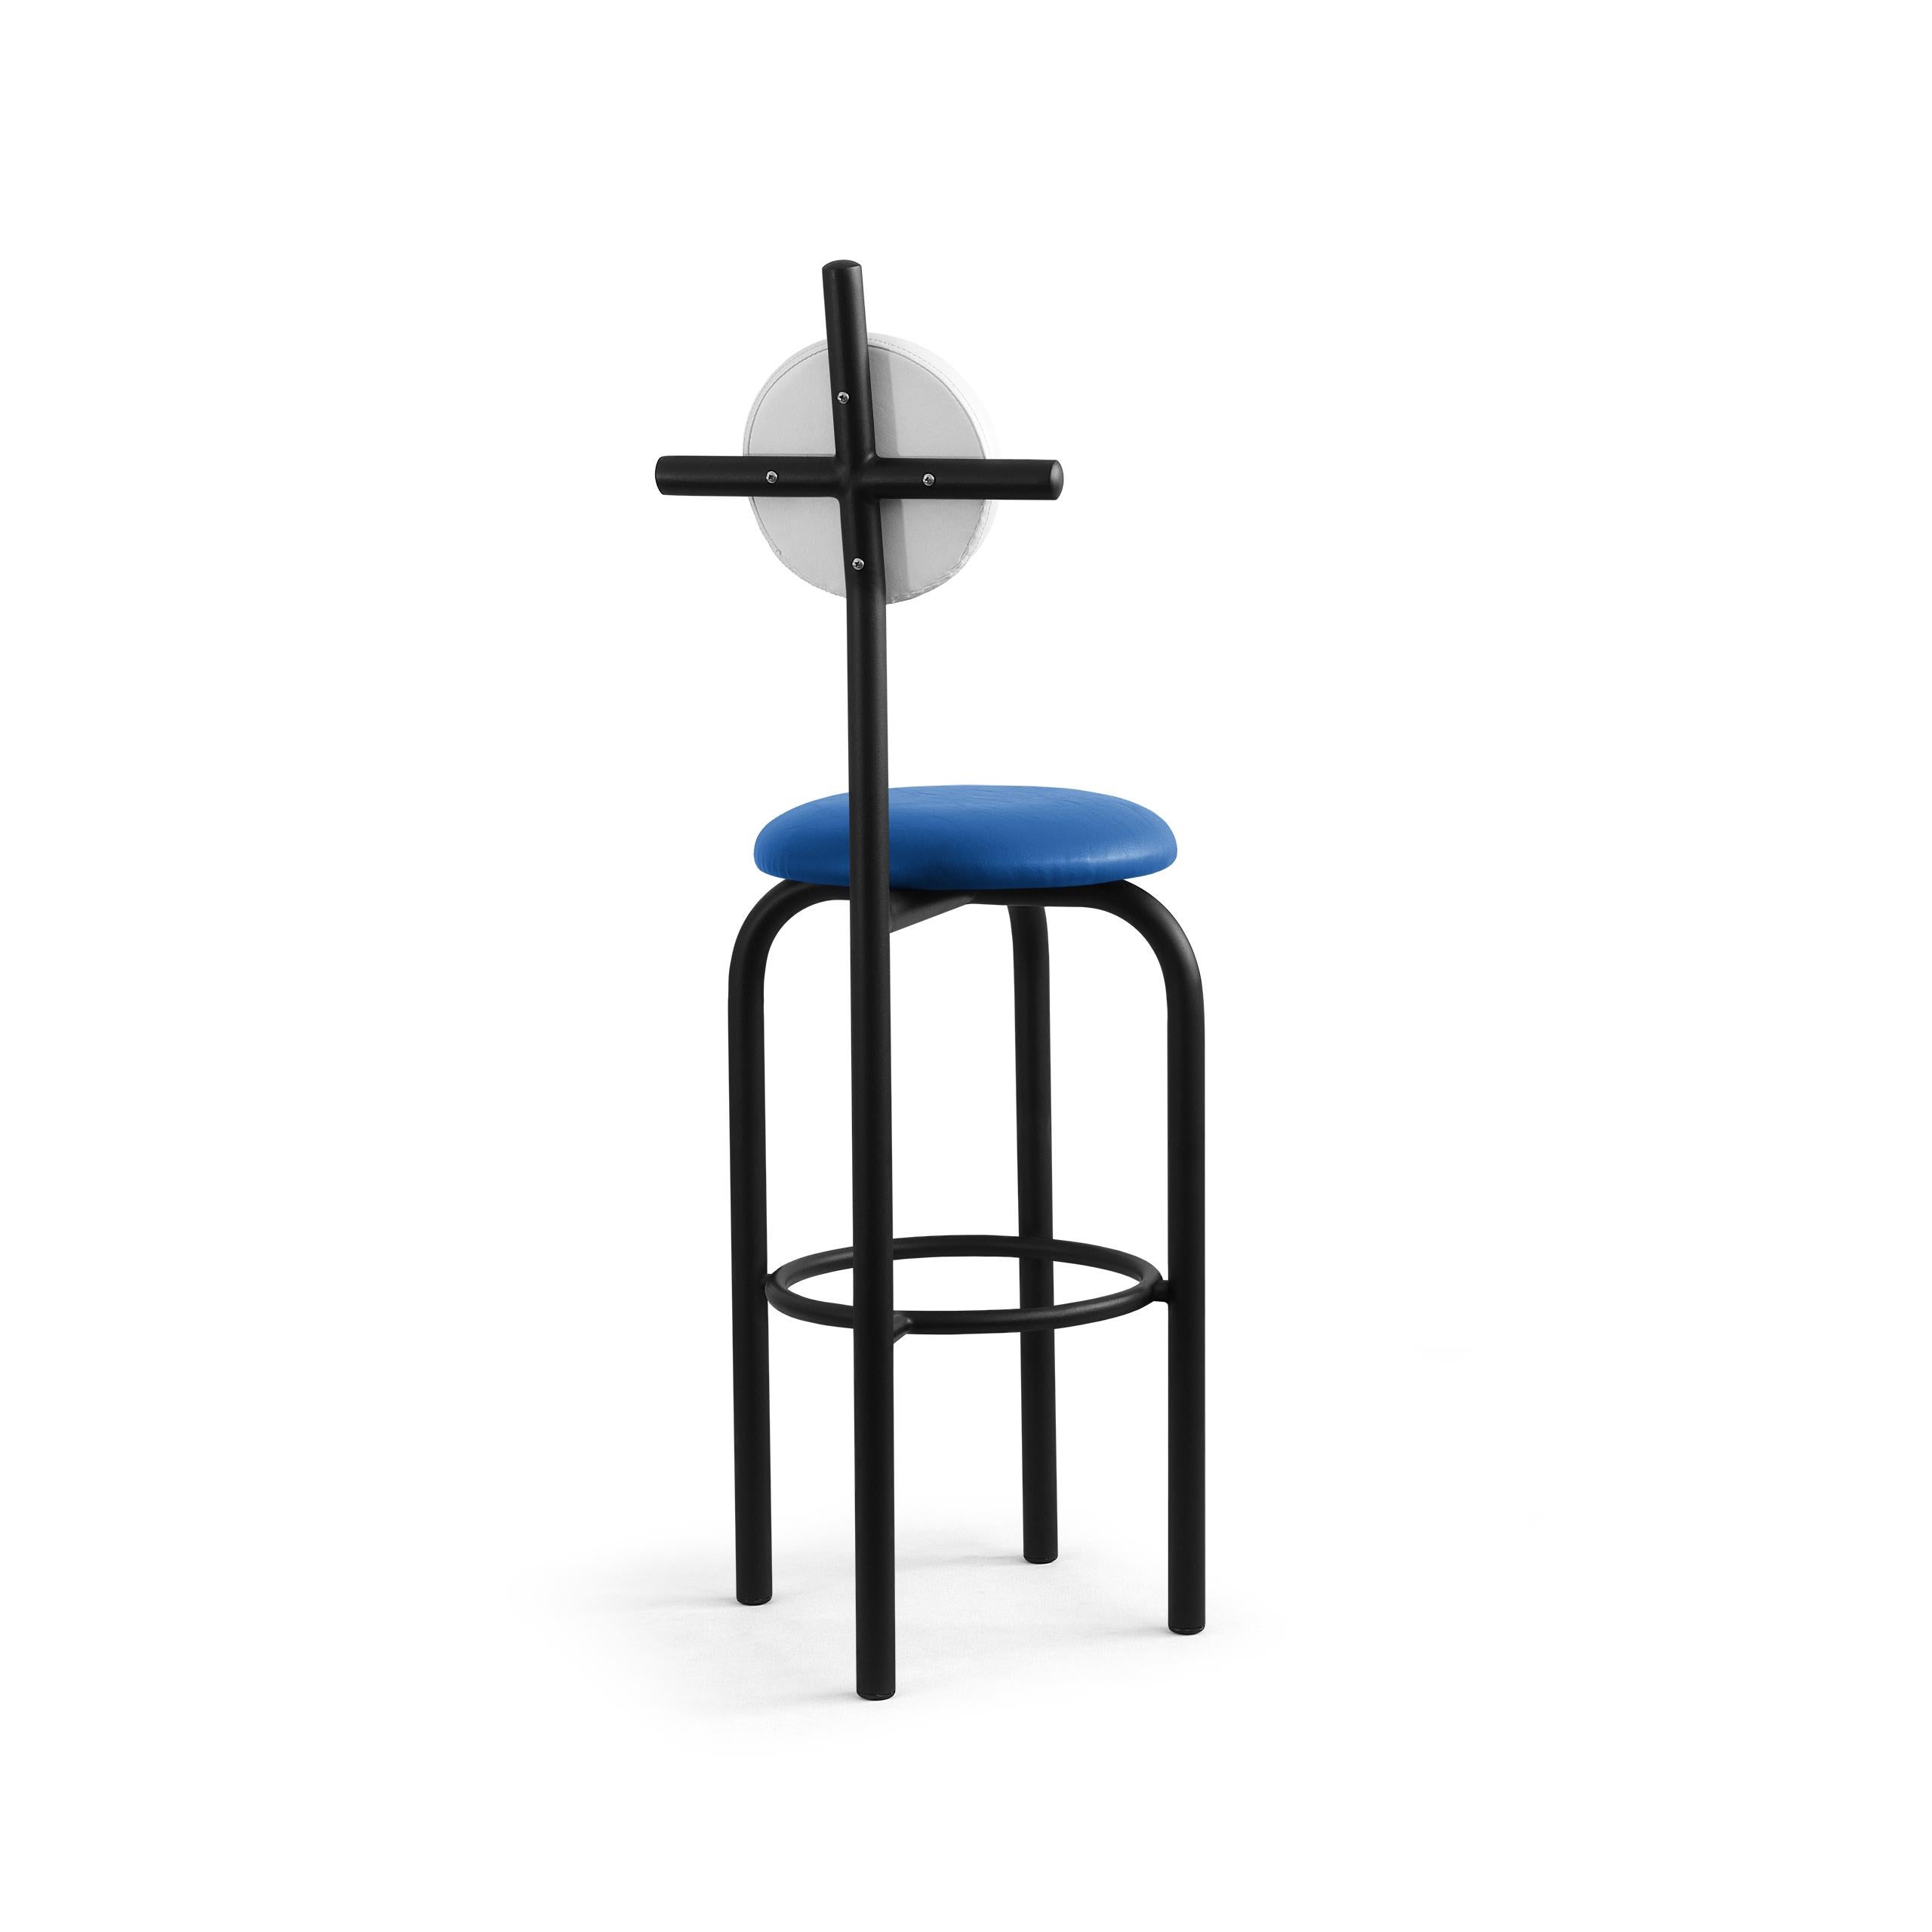 Appliqué PK19 Impermeable Bar Stool, Blue Seat & Black Metal Structure by Paulo Kobylka For Sale